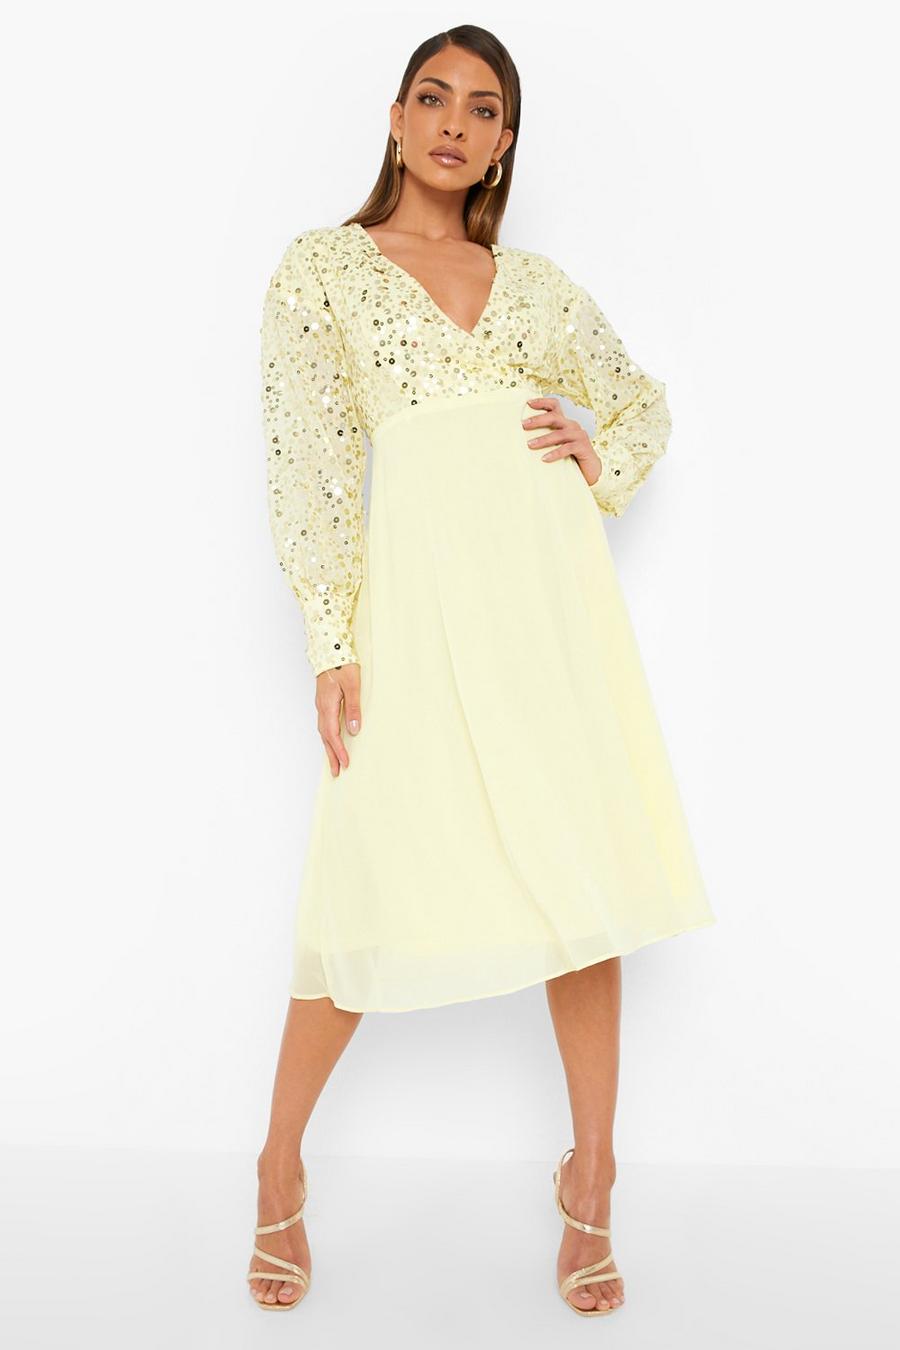 Washed lime yellow Sequin Wrap Midi Skater Dress